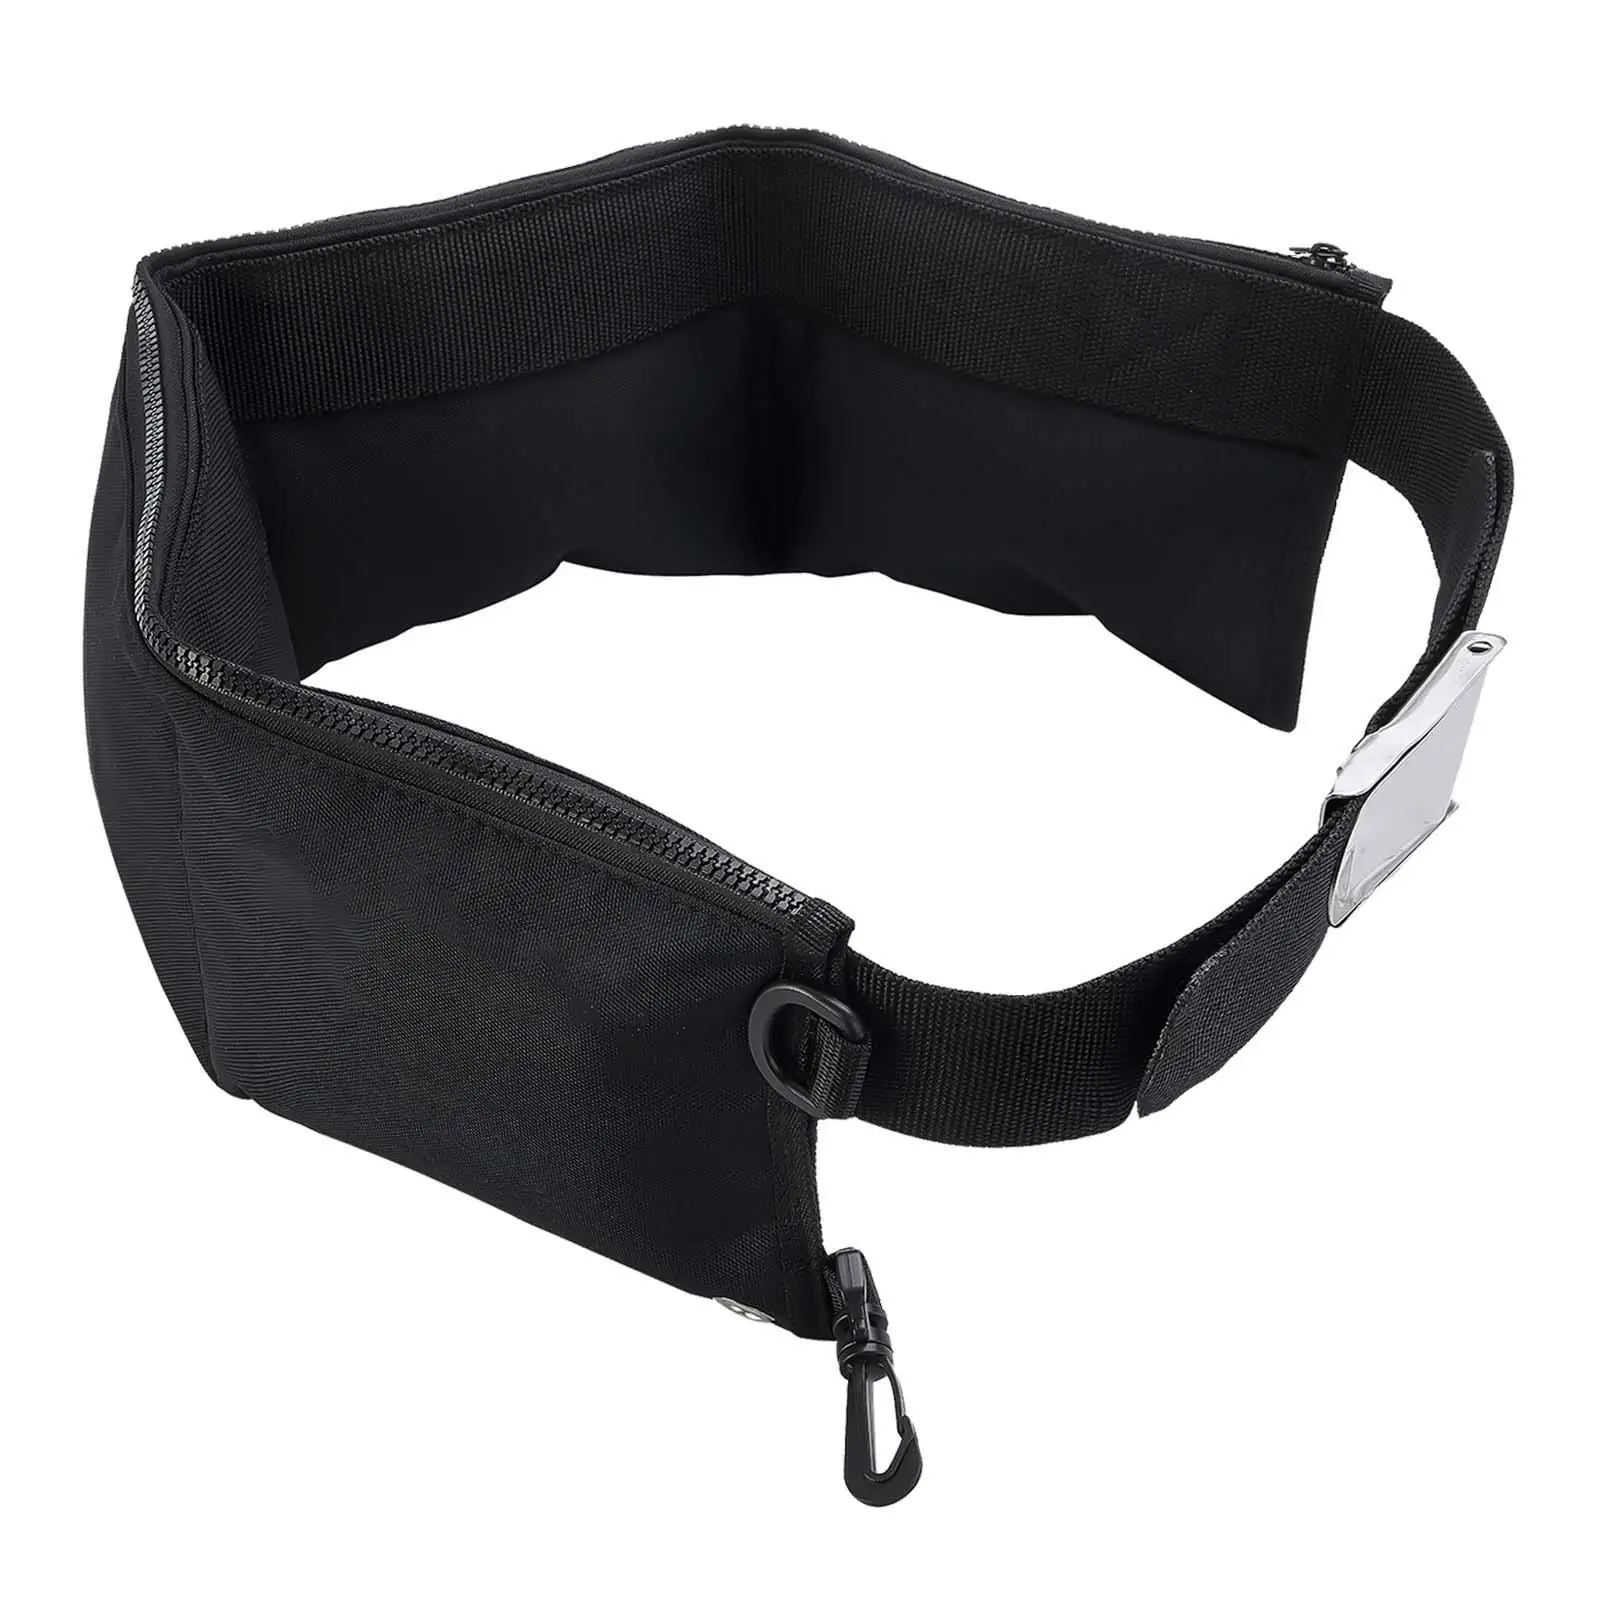 Snorkeling Webbing Weight Pouch Belt Dive Weight Belt Heavy Duty Self Draining Pockets Black Quick Release Buckle with 4 Pocket